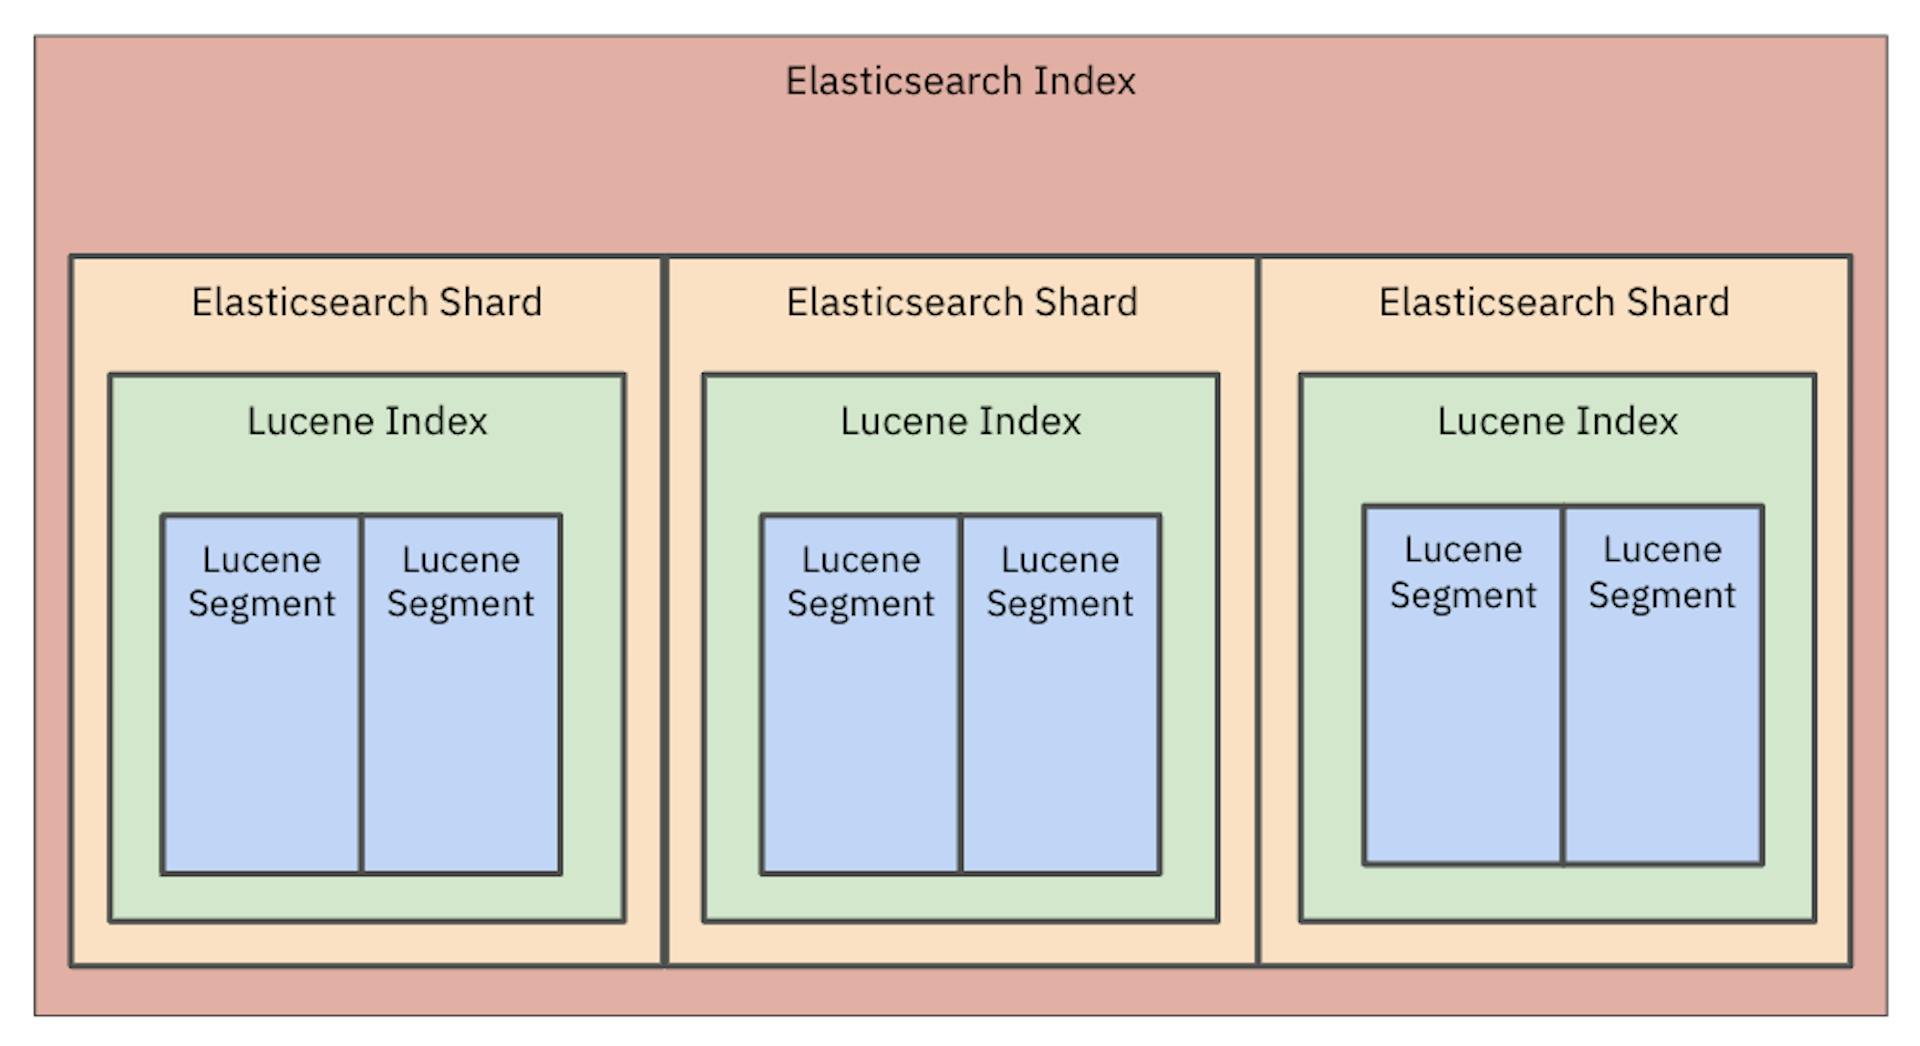 Image 1: Elasticsearch data is stored in a Lucene index and that index is broken down into smaller segments.